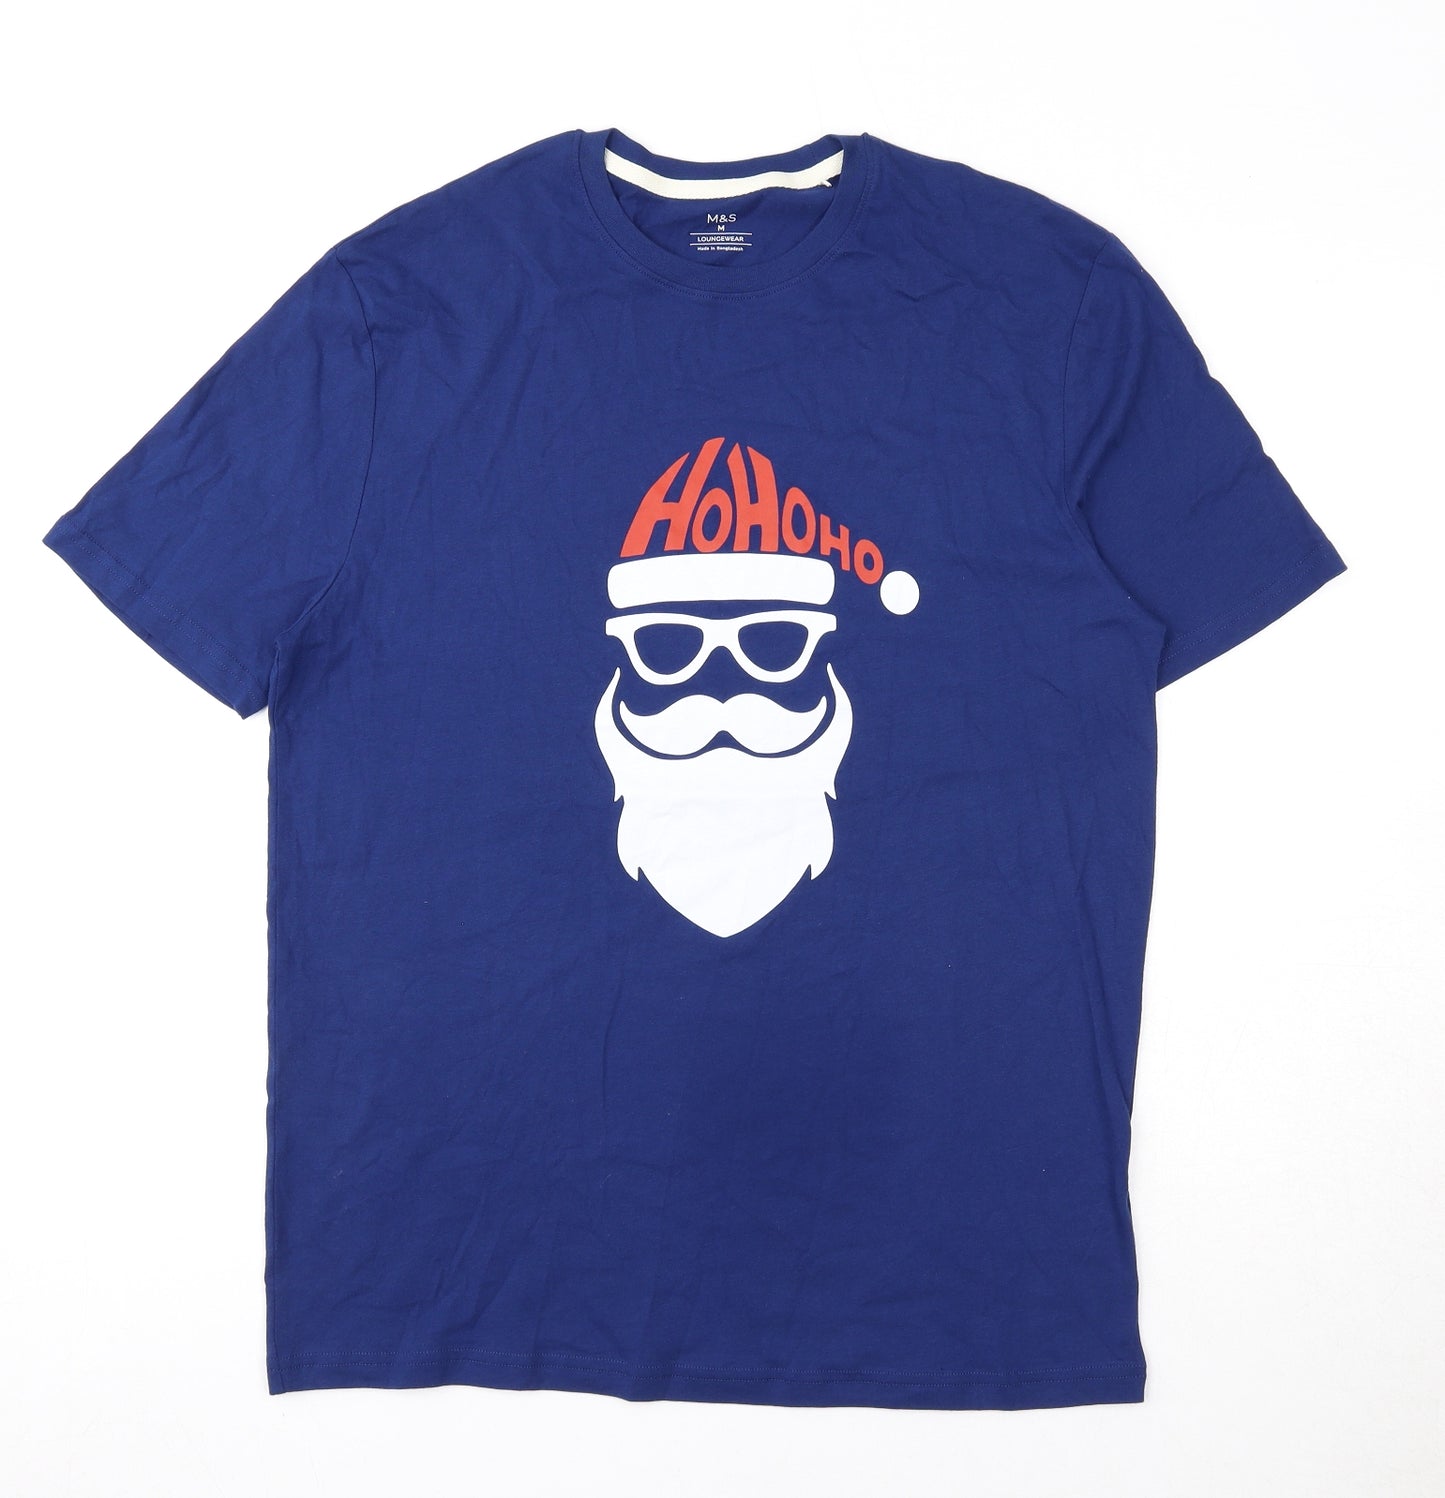 Marks and Spencer Mens Blue Cotton T-Shirt Size M Crew Neck Pullover - Father Christmas HO HO HO